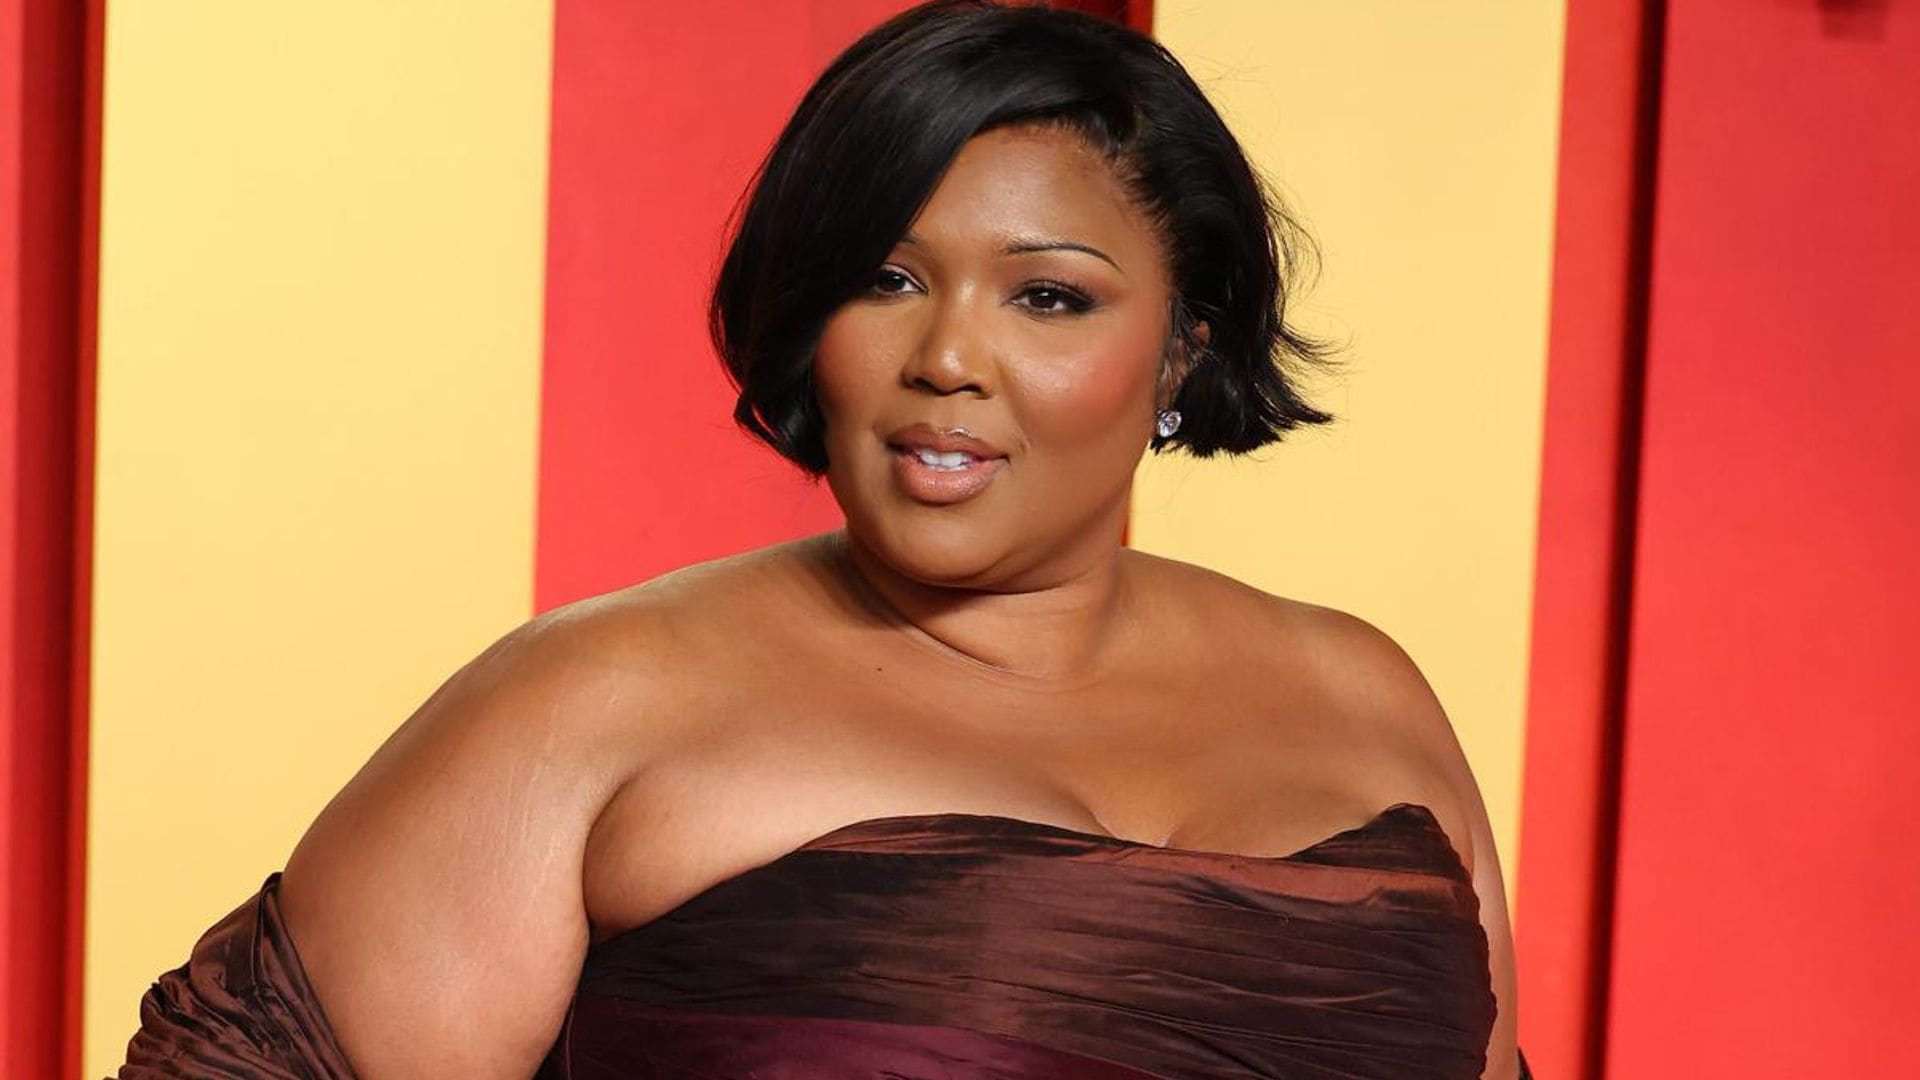 Lizzo announces that she’s quitting in an emotional post